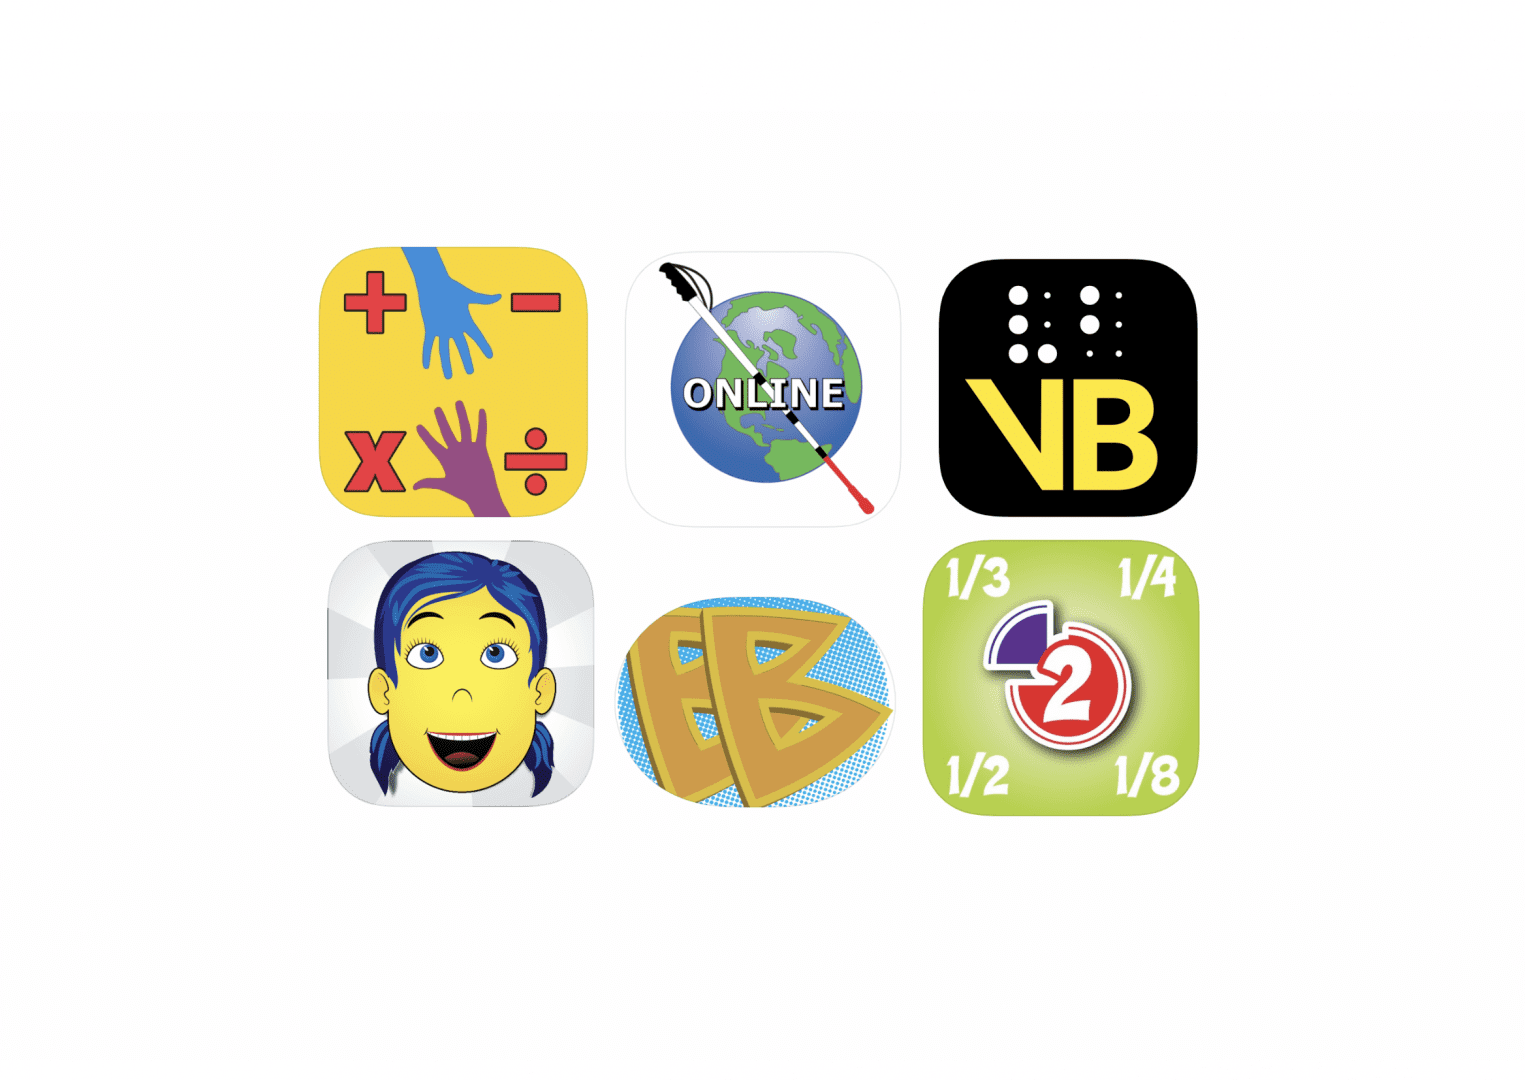 6 app icons for the apps described in the blog